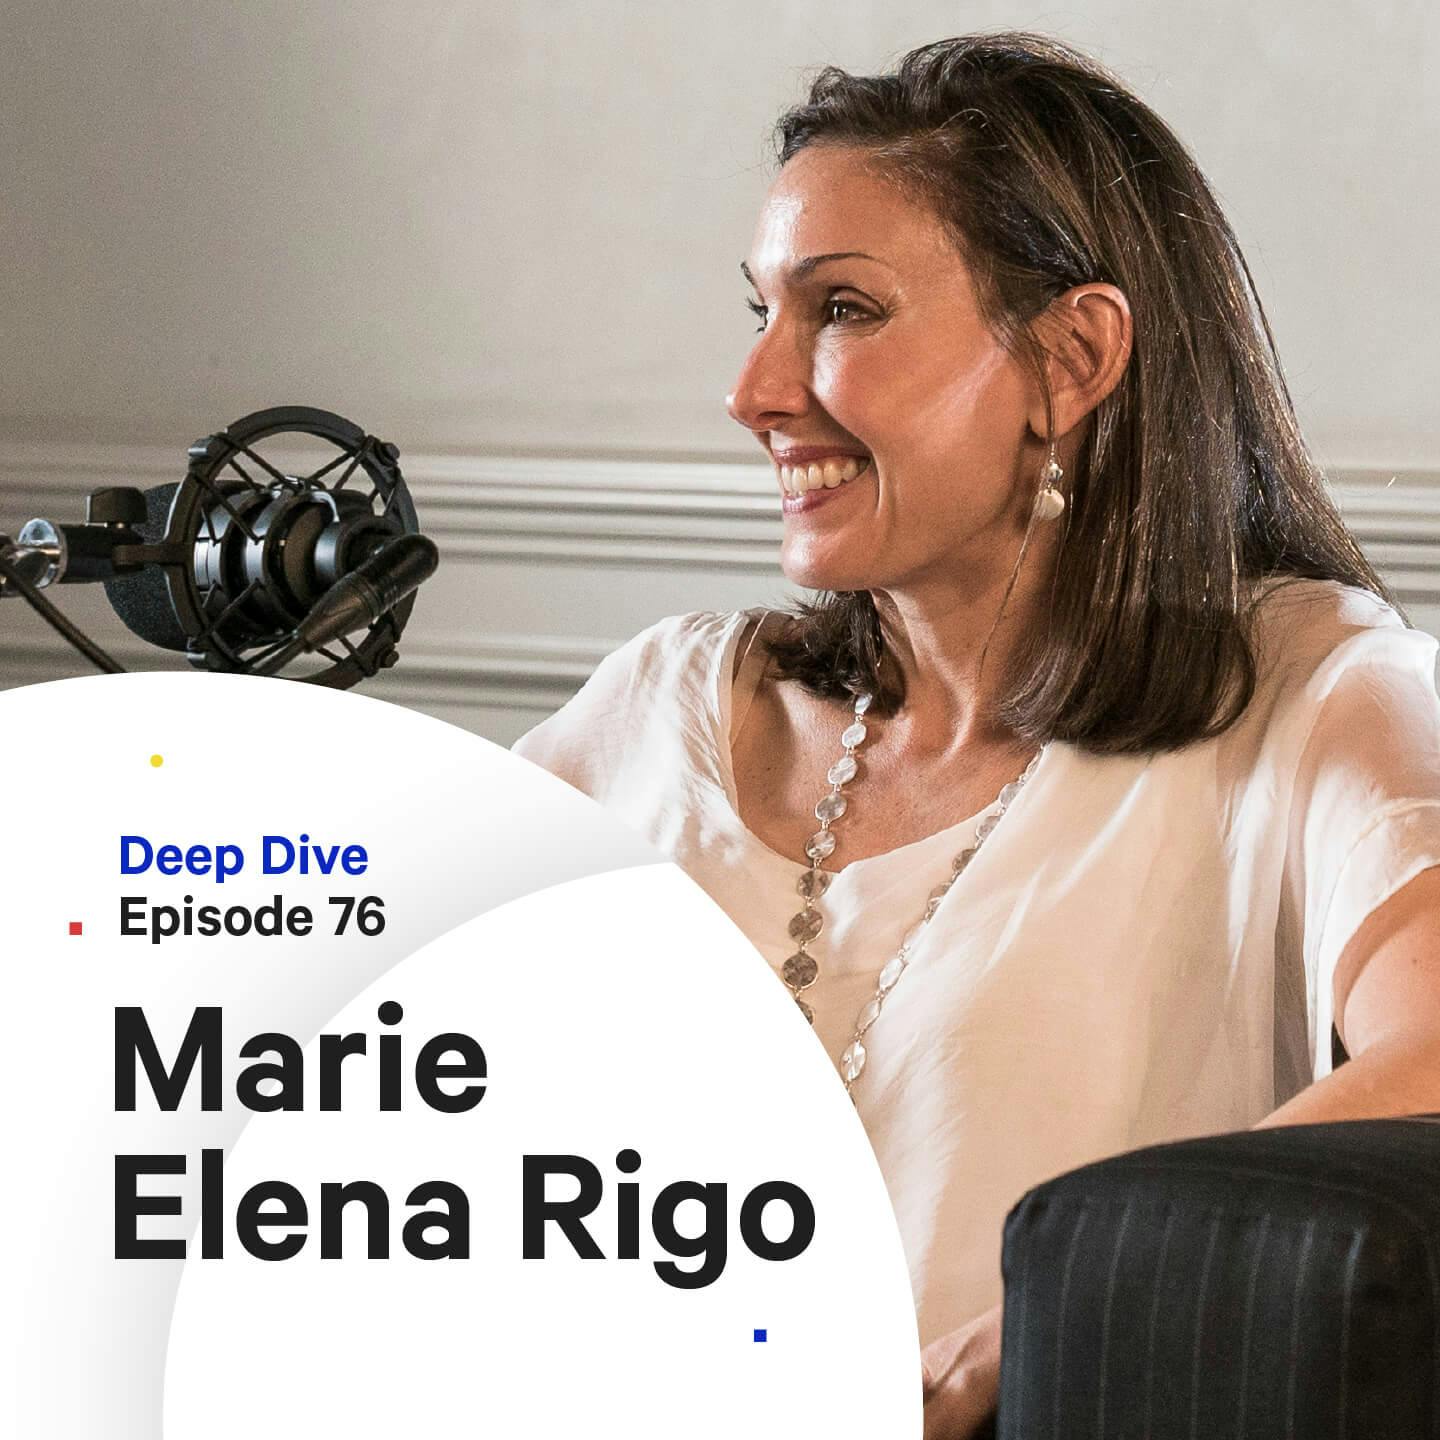 076 - Deep Dive: Therapy, Leadership and Invisible Pressures — with Marie Elena Rigo